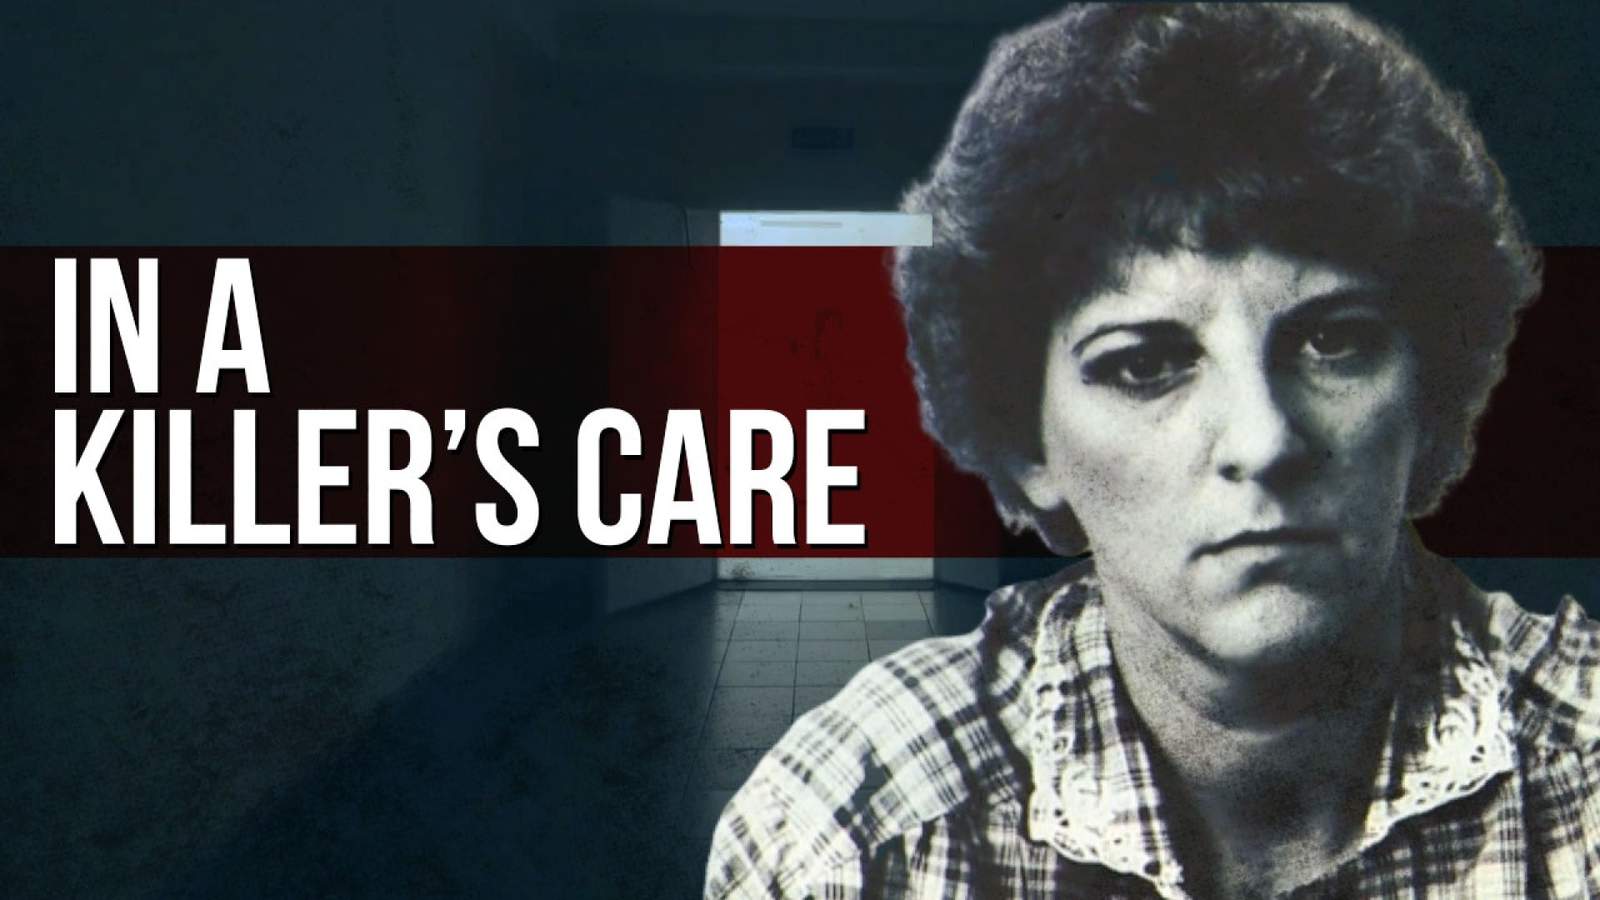 In A Killers Care: The story behind one of Texas most notorious alleged serial killers Genene Jones